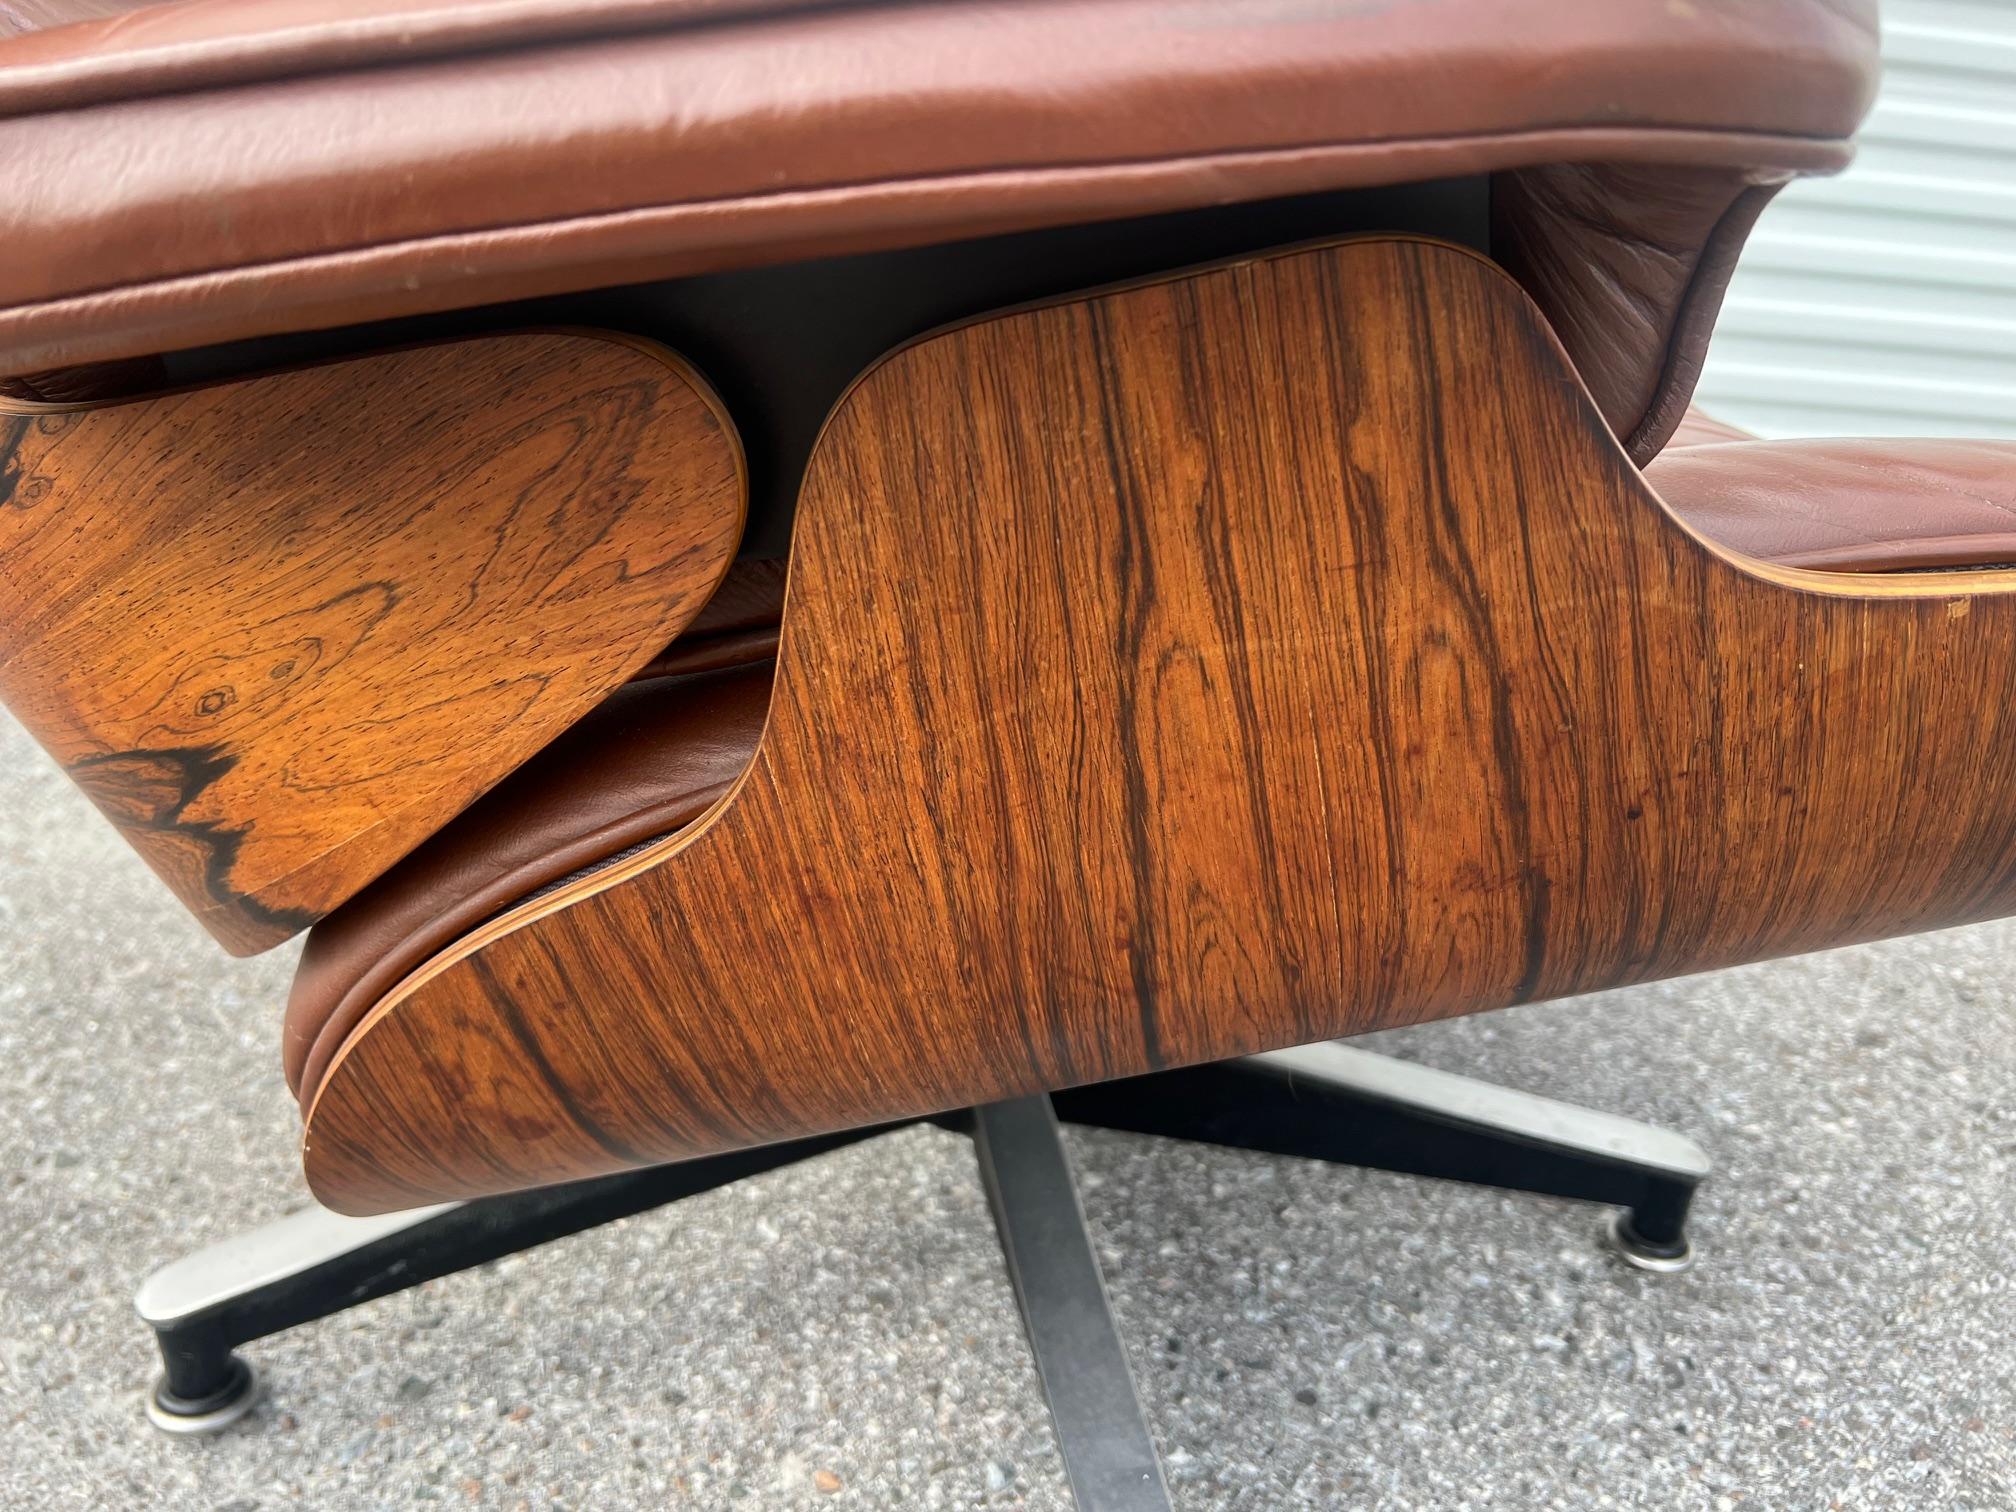 Late 20th Century  Classic Charles Eames Herman Miller Lounge Chair 1970's Cognac Brown Leather For Sale